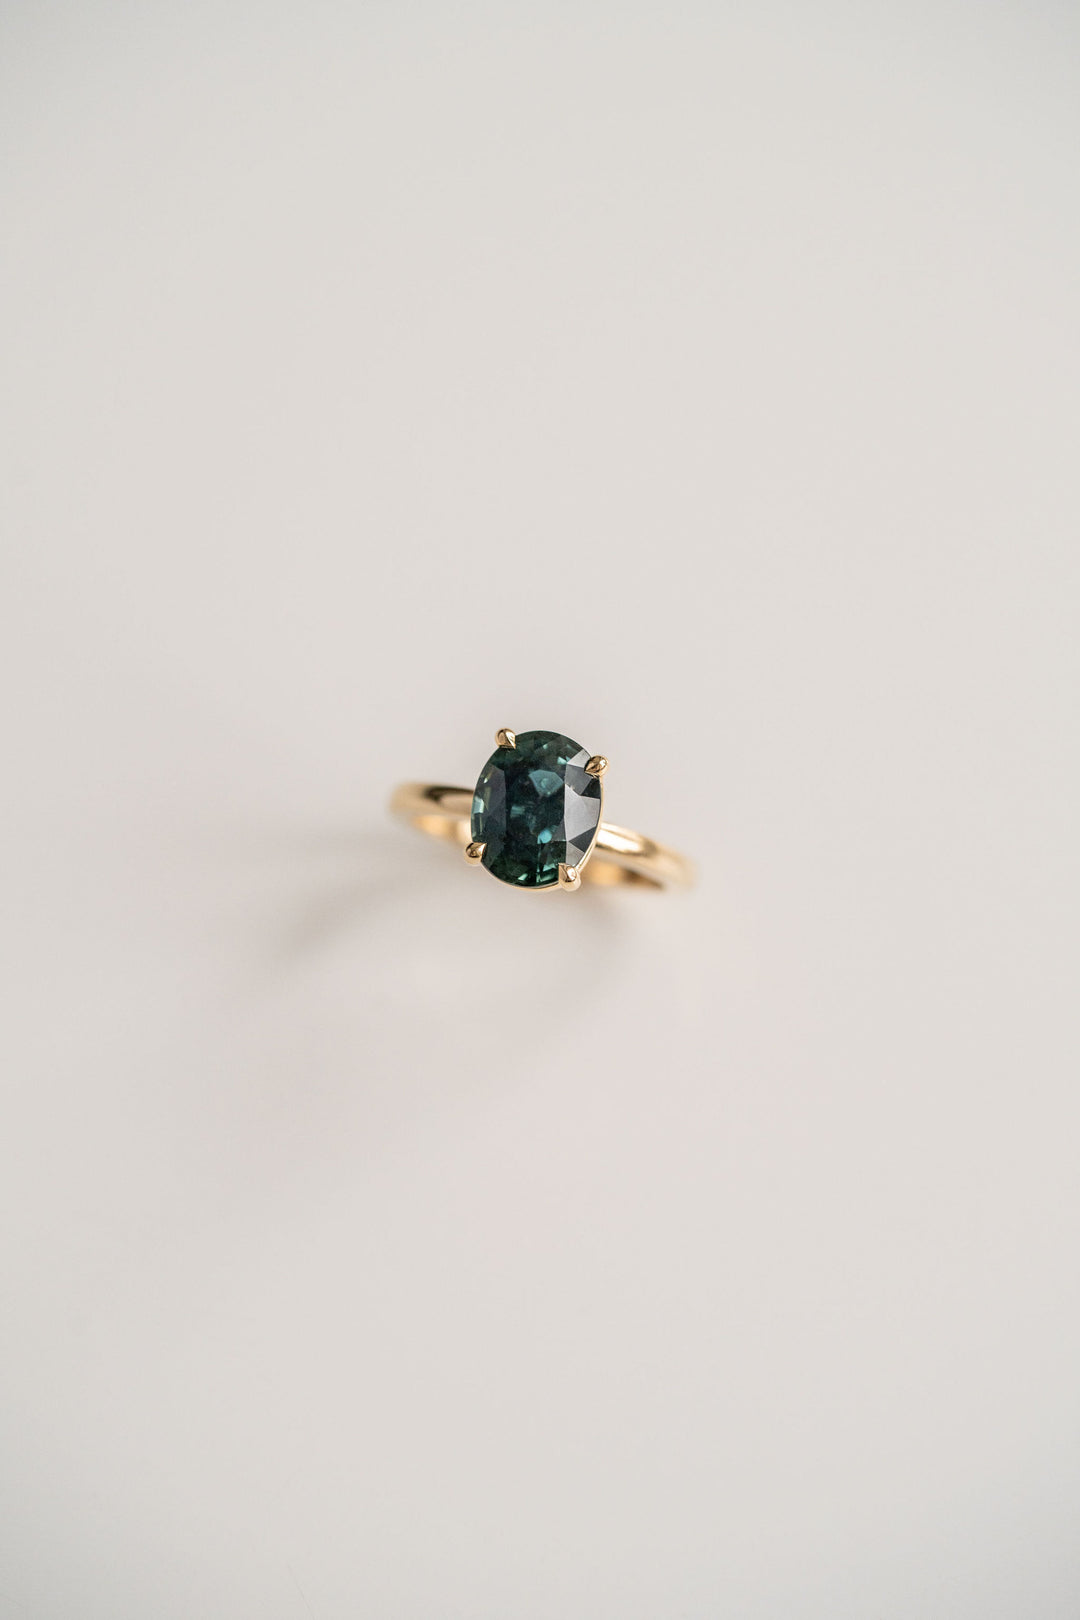 3.97ct. Oval West Coast Green Sri Lankan Sapphire Solitaire, 14k Yellow Gold